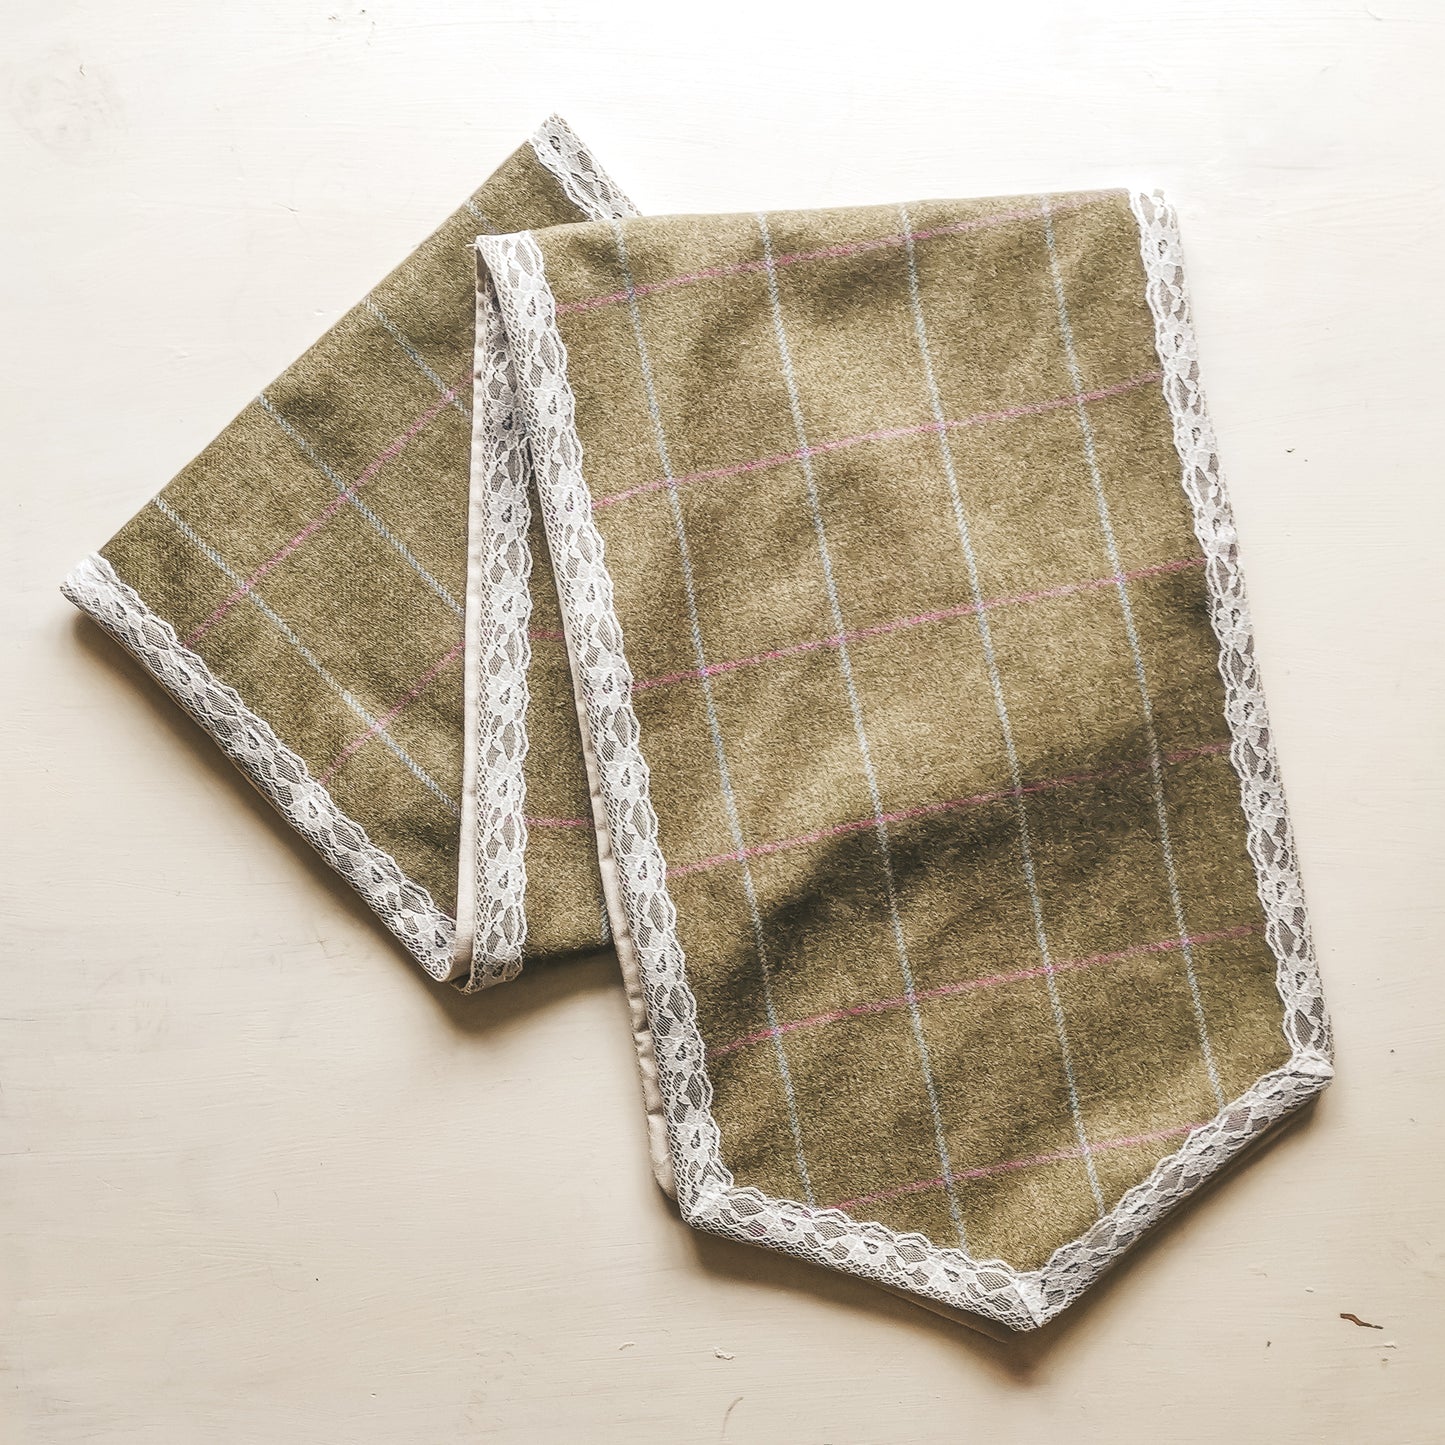 Light Green Blue & Pink Check Tweed Table Runner with lace edging, backed in linen by F&B Crafts